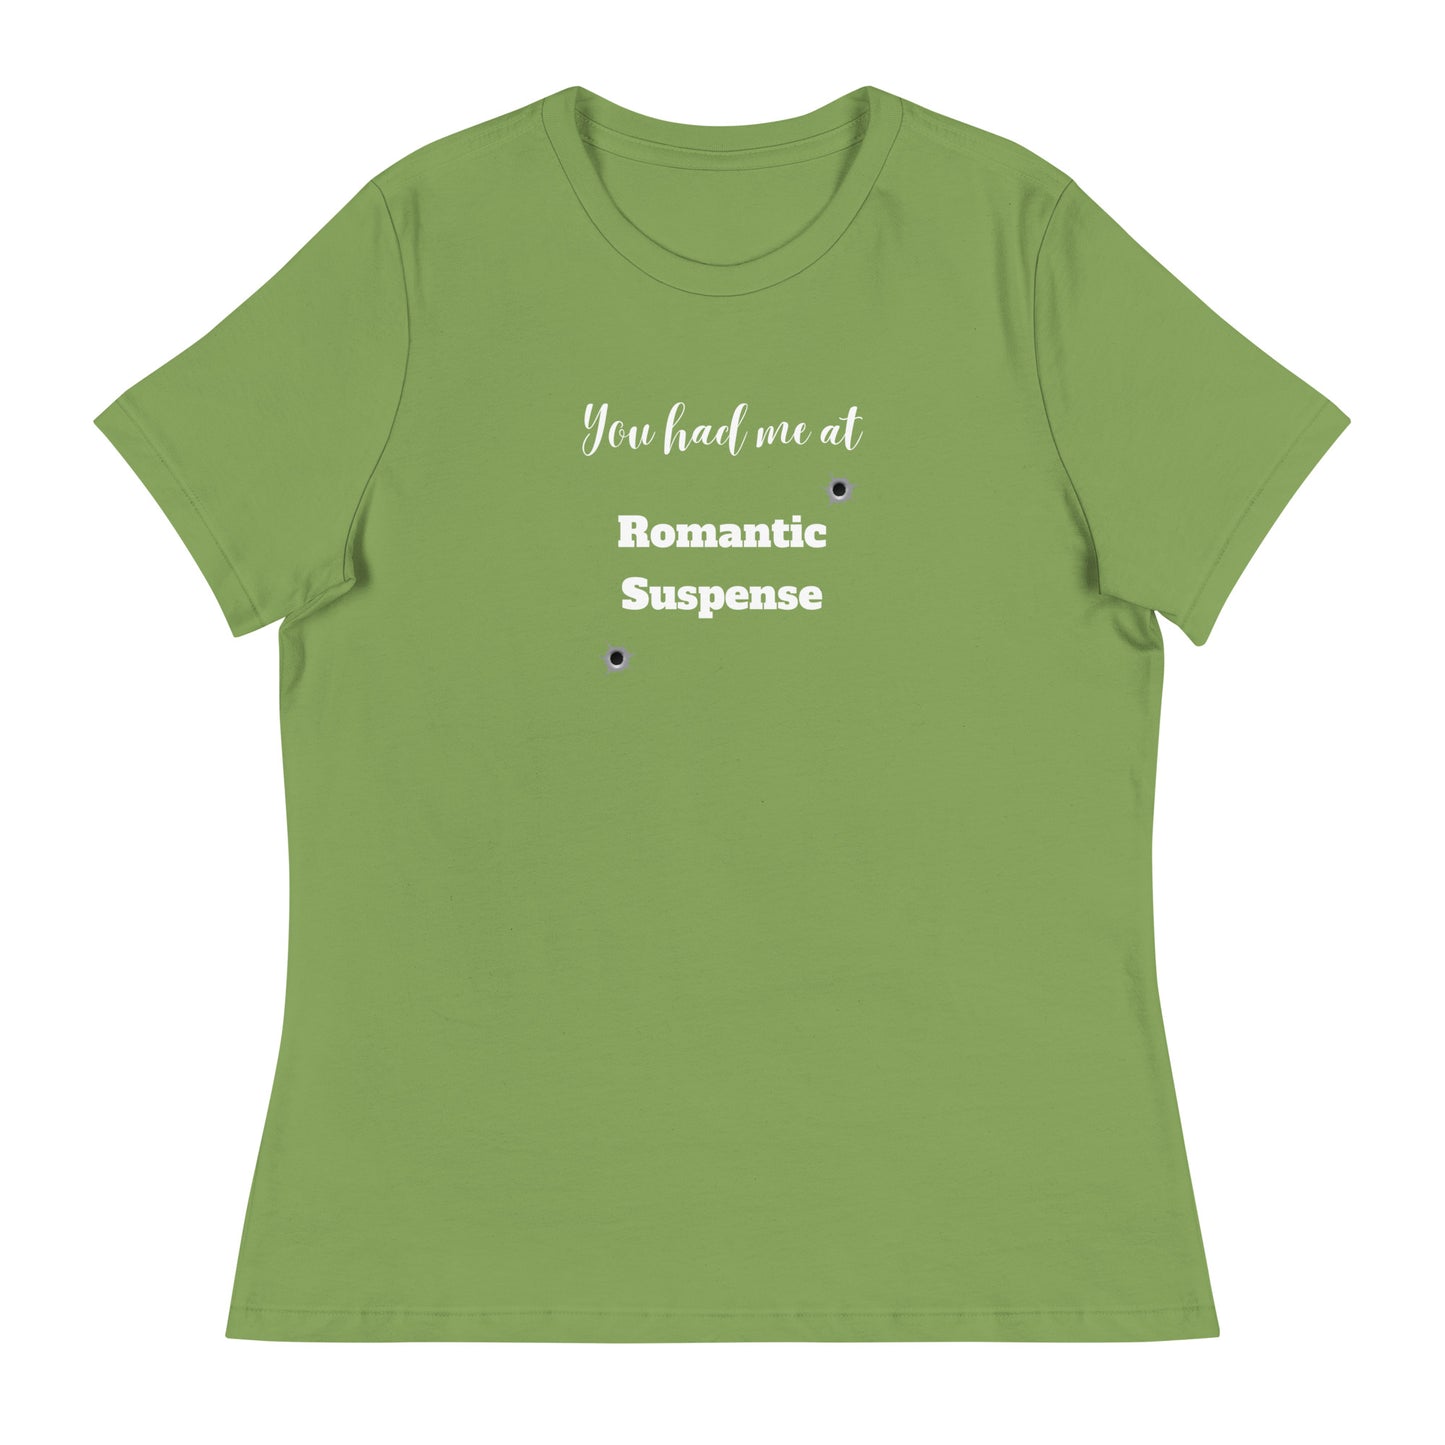 Women's Relaxed T-Shirt You had me at Romantic Suspense, no author logo